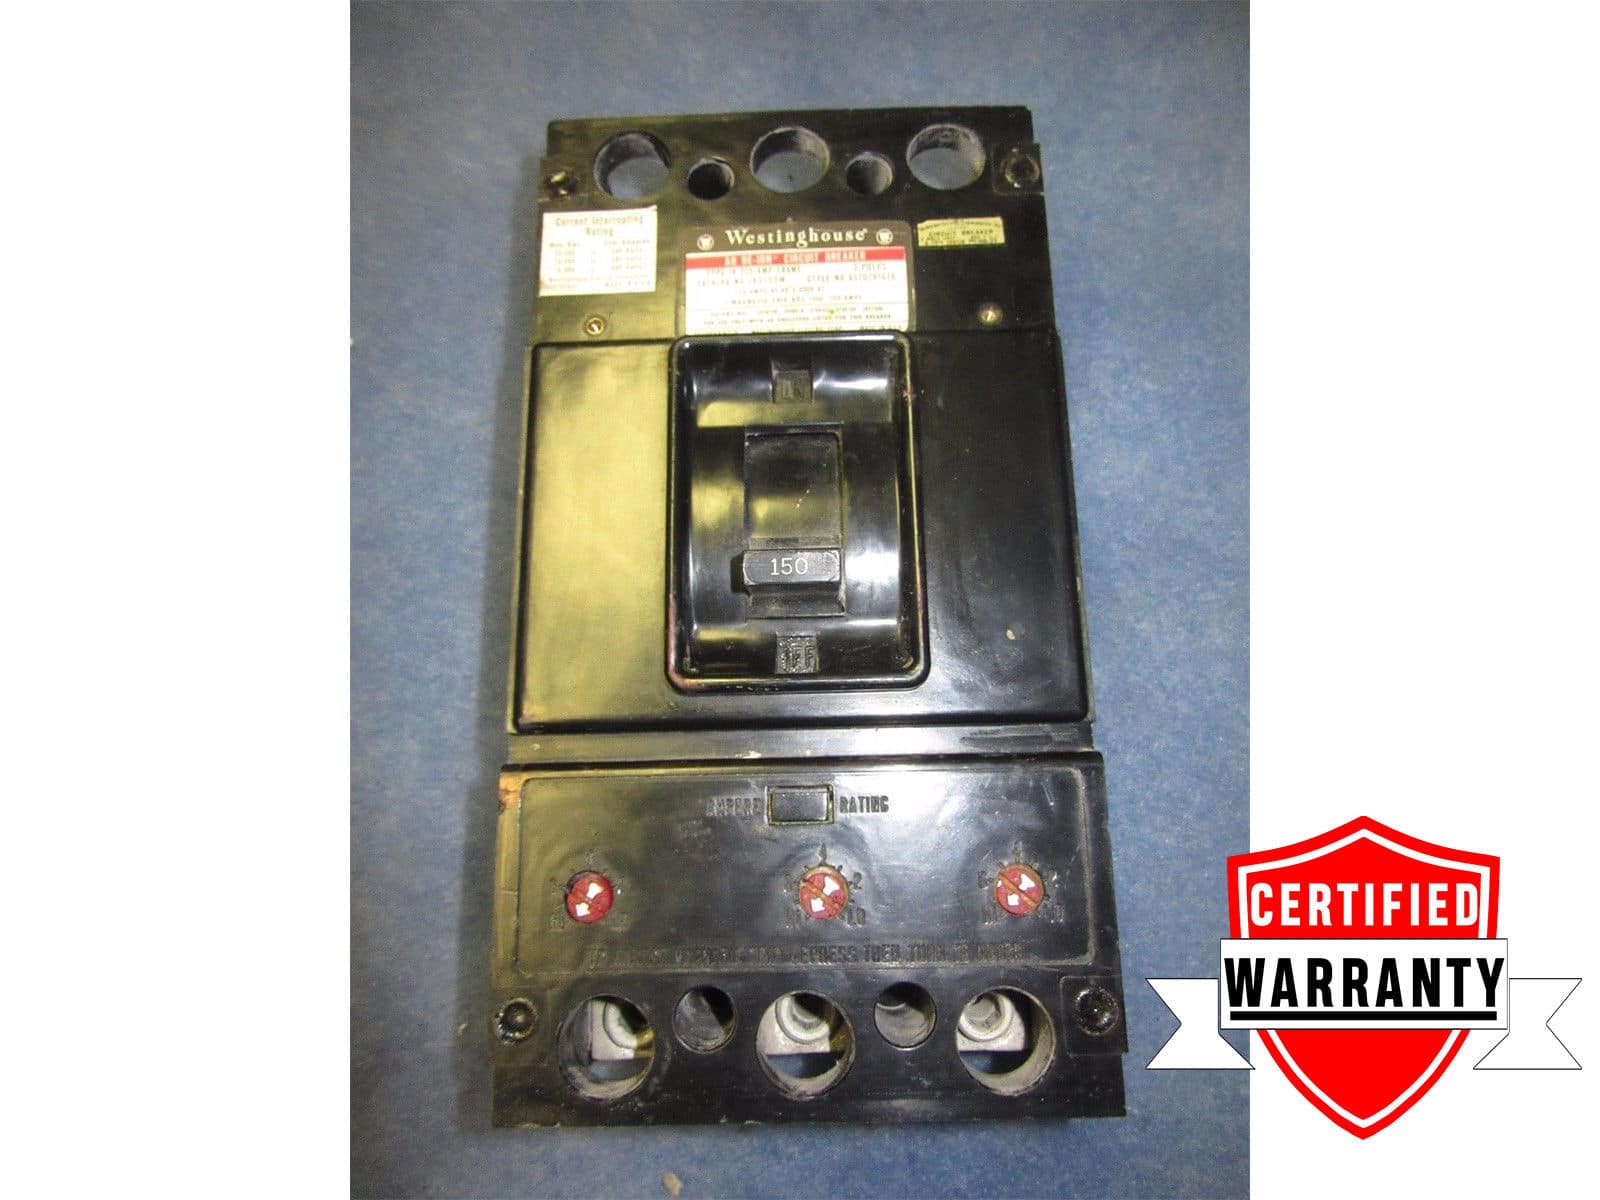 Details about   WESTINGHOUSE FD3150LSS02 150 A CIRCUIT BREAKER 600V 3-P RECONDITIONED 